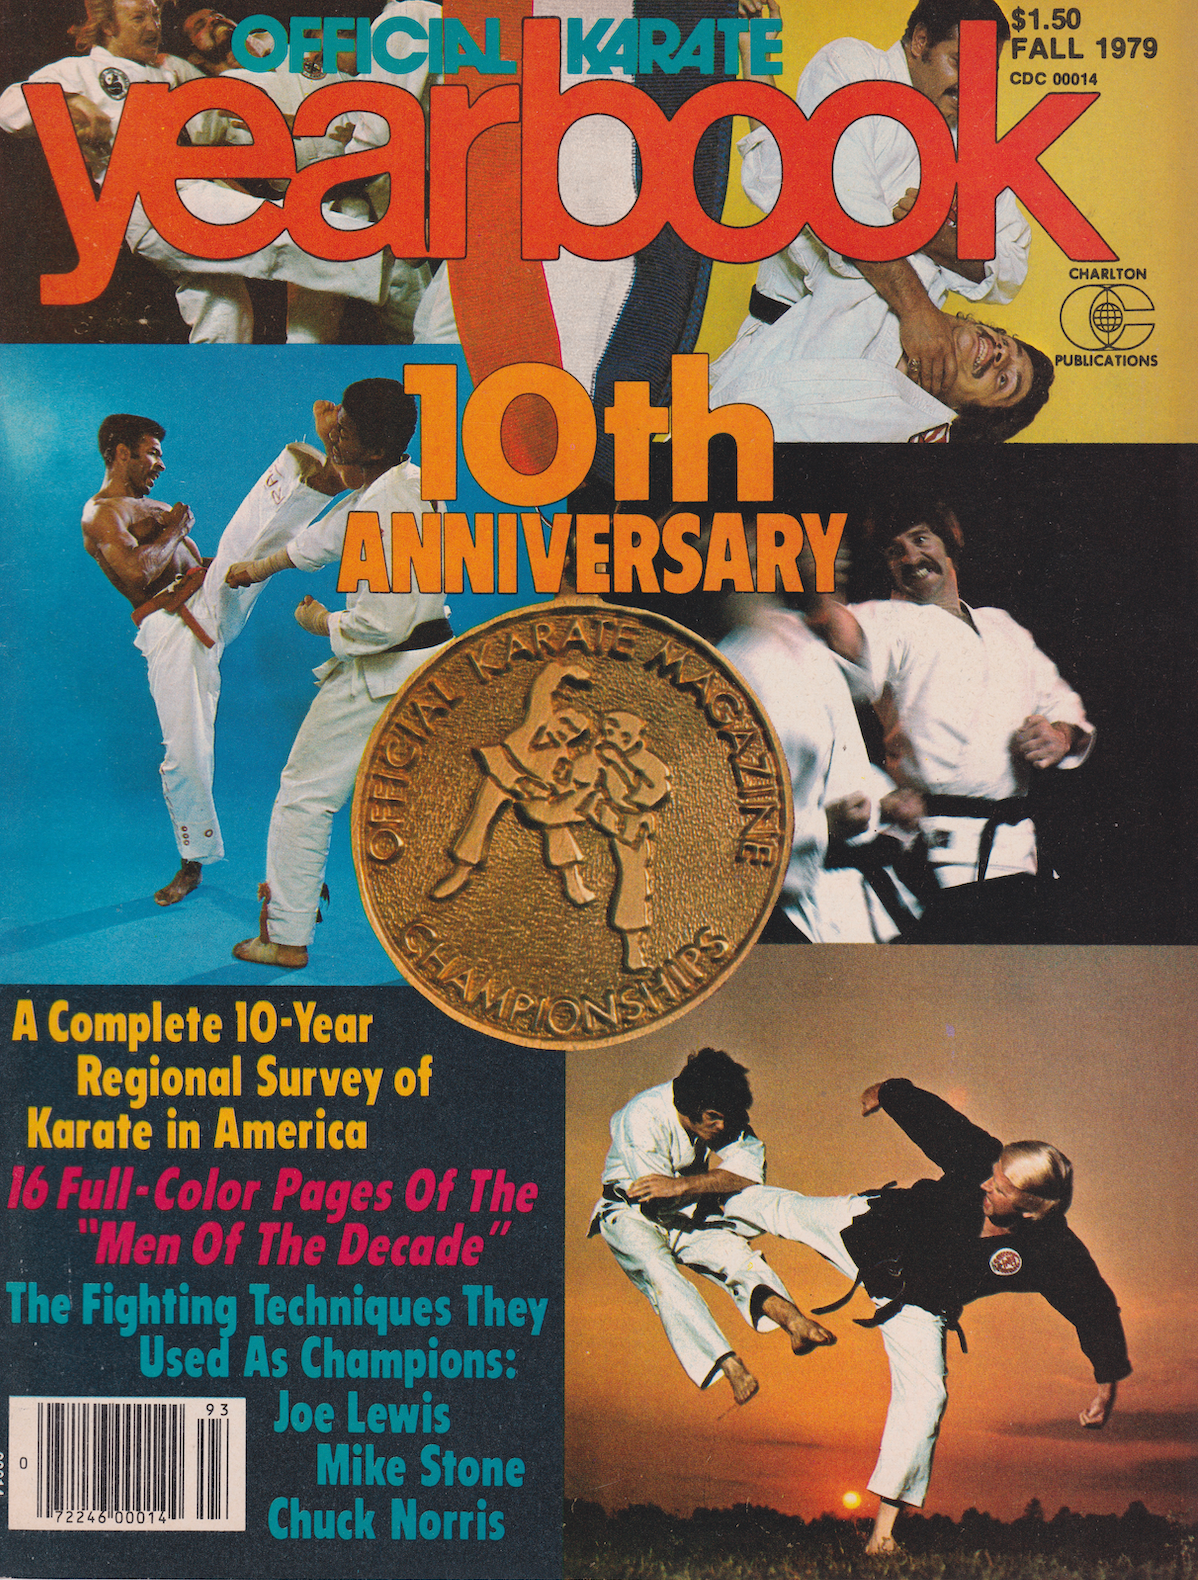 Official Karate Yearbook Fall 1979 Magazine (Preowned) - Budovideos Inc